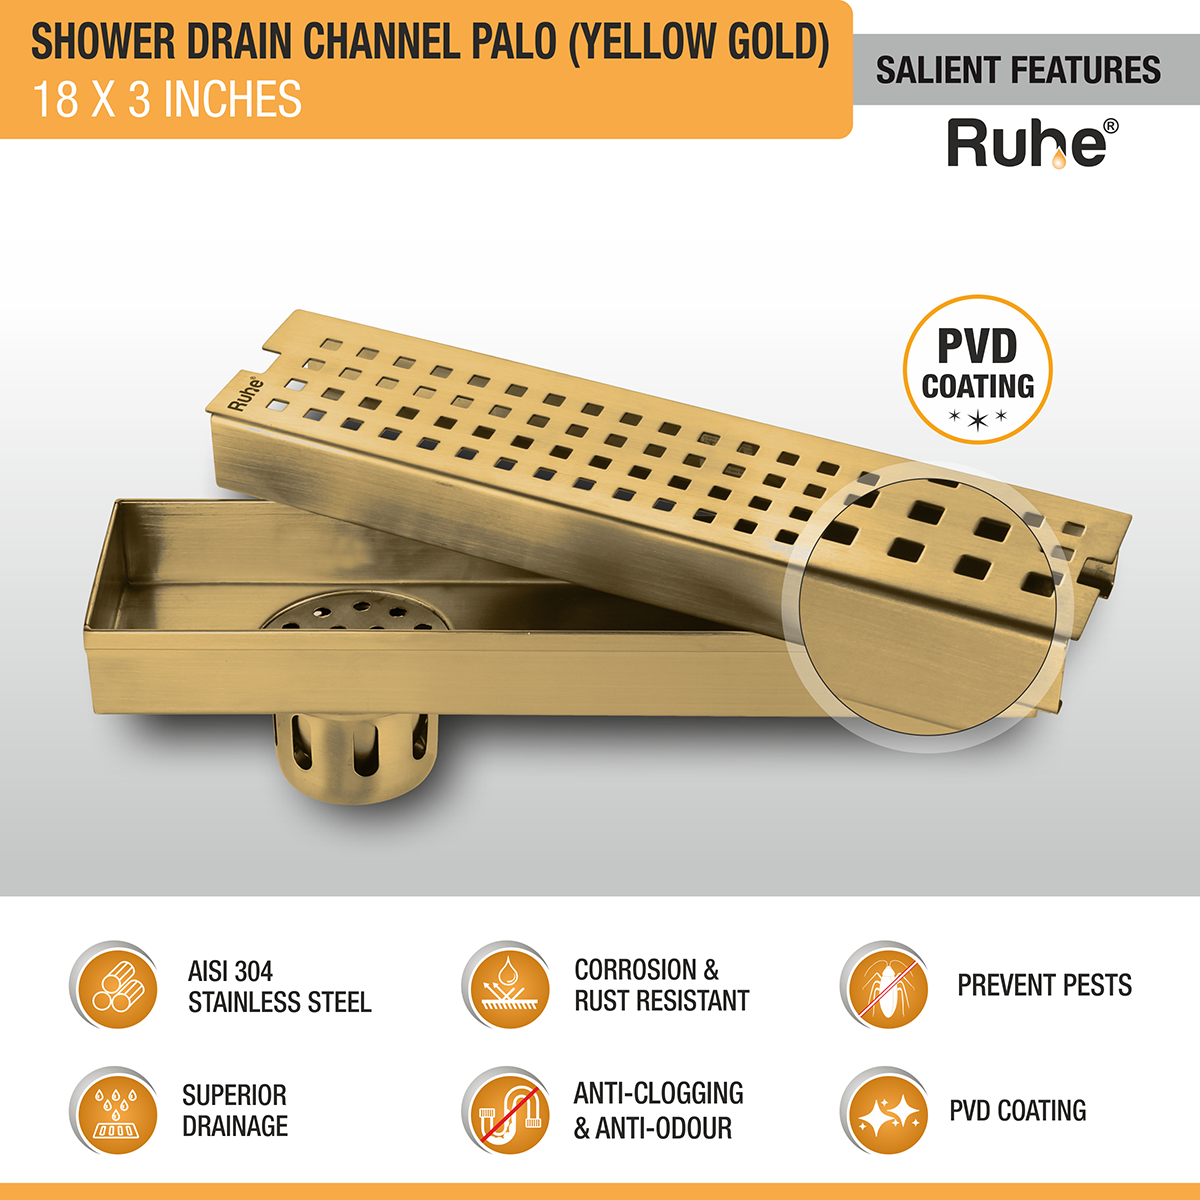 Palo Shower Drain Channel (18 x 3 Inches) YELLOW GOLD features